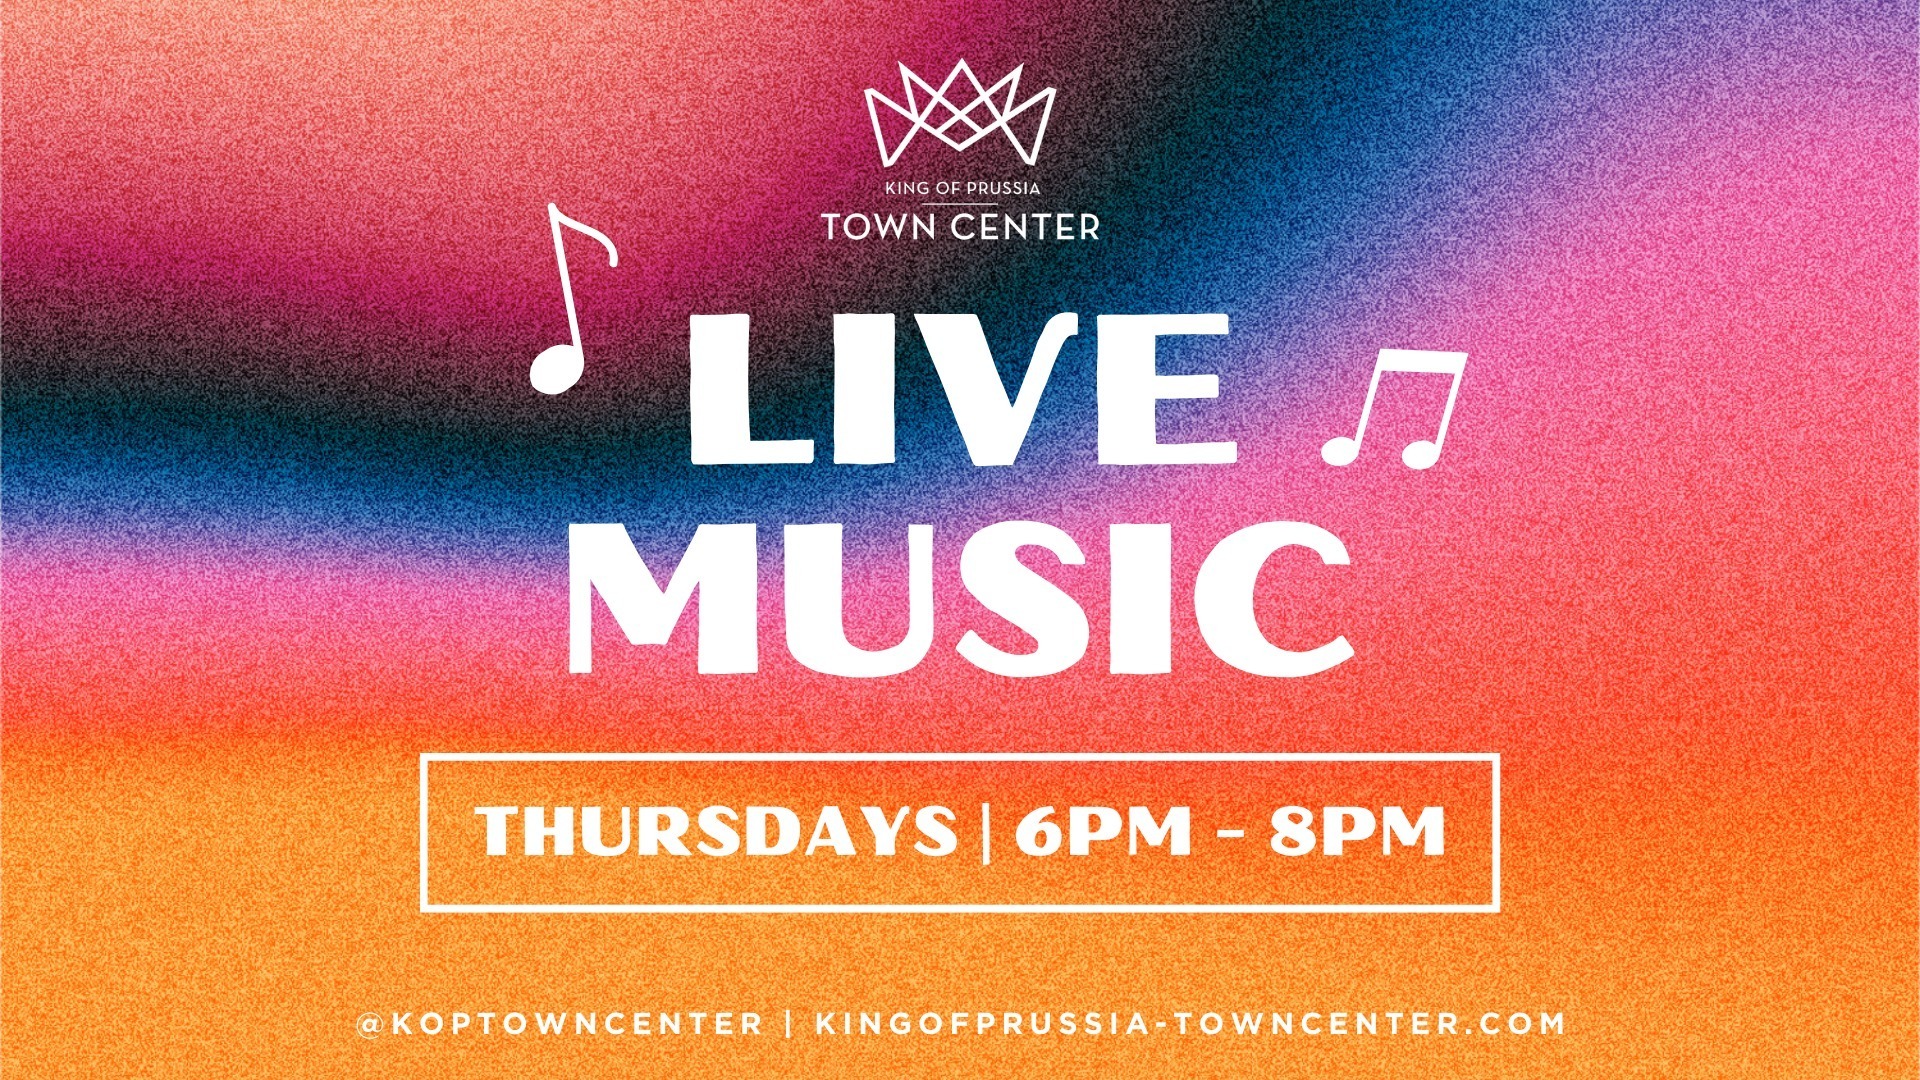 Live Music Series at The King of Prussia Town Center, King of Prussia, Pennsylvania, United States